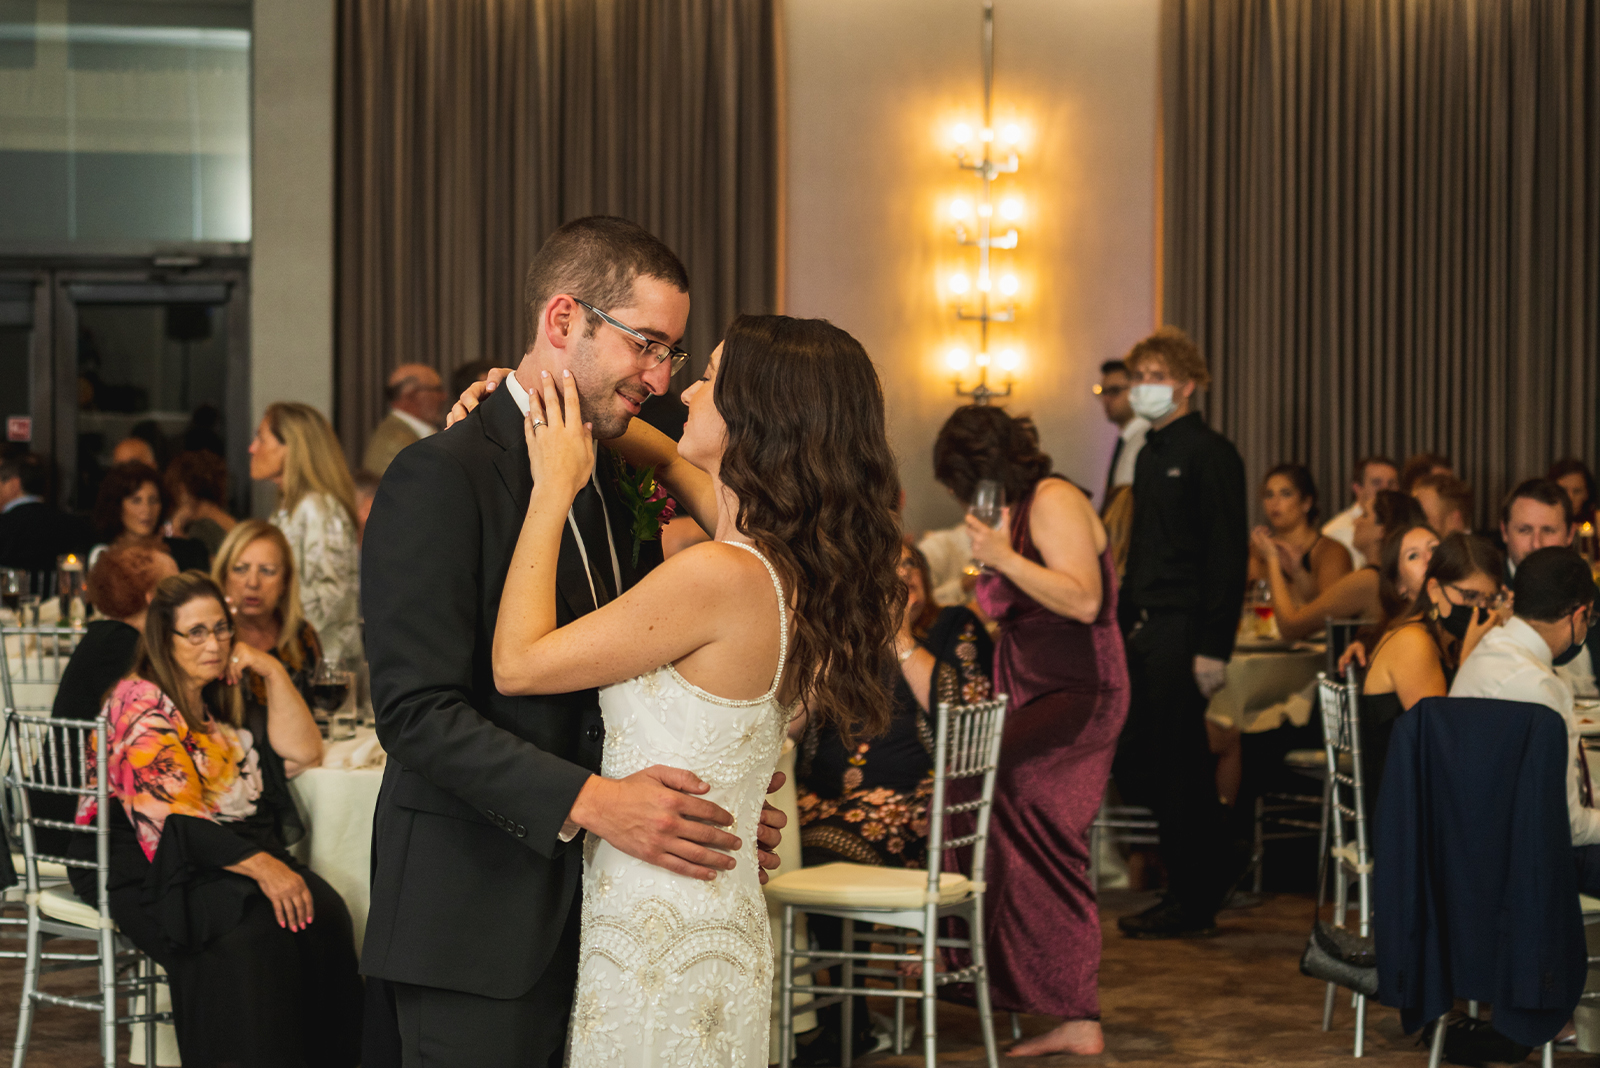 Bride and groom first dance, romantic, cute, sweet, classy wedding reception at Landerhaven, Mayfield Heights OH